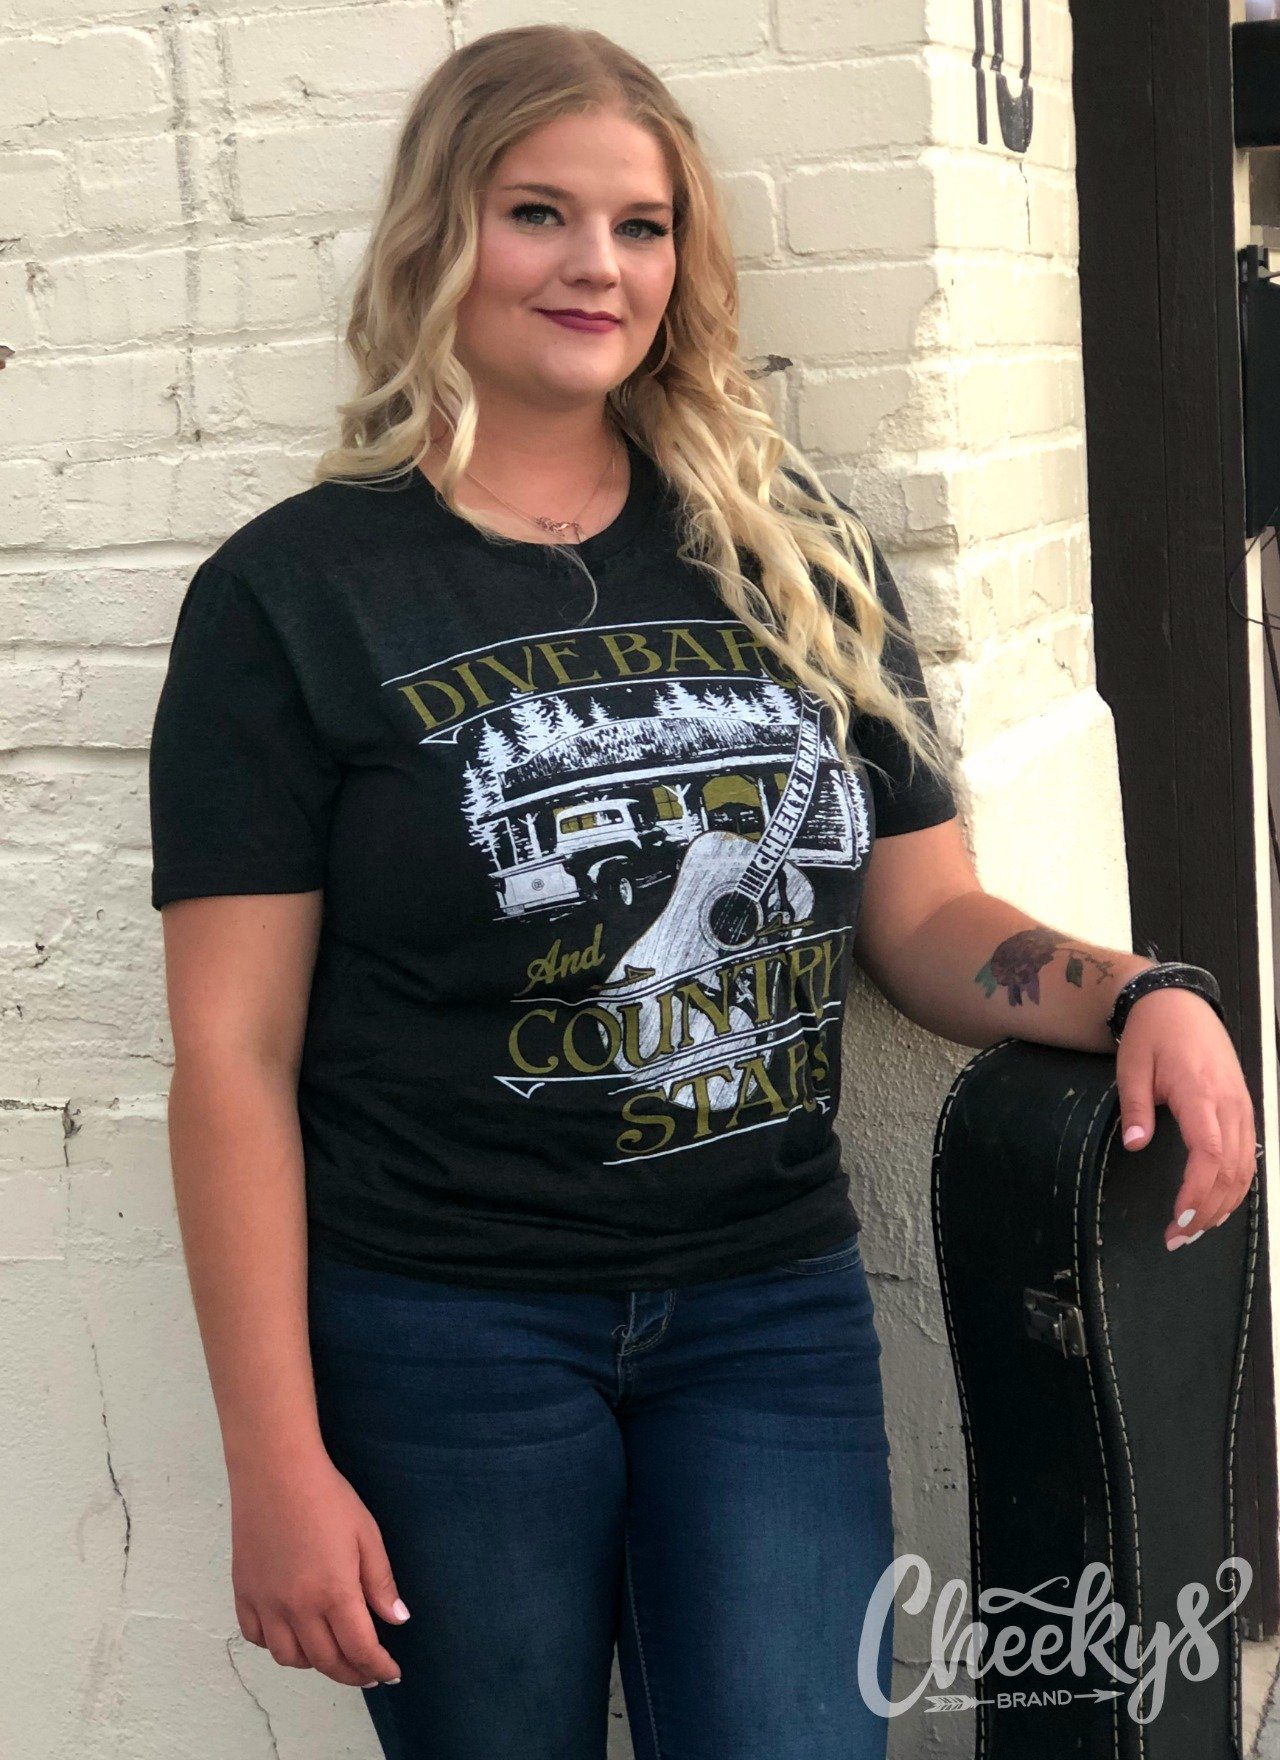 Dive Bars and Country Stars on Vintage Black Unisex Cheekys Apparel 38 